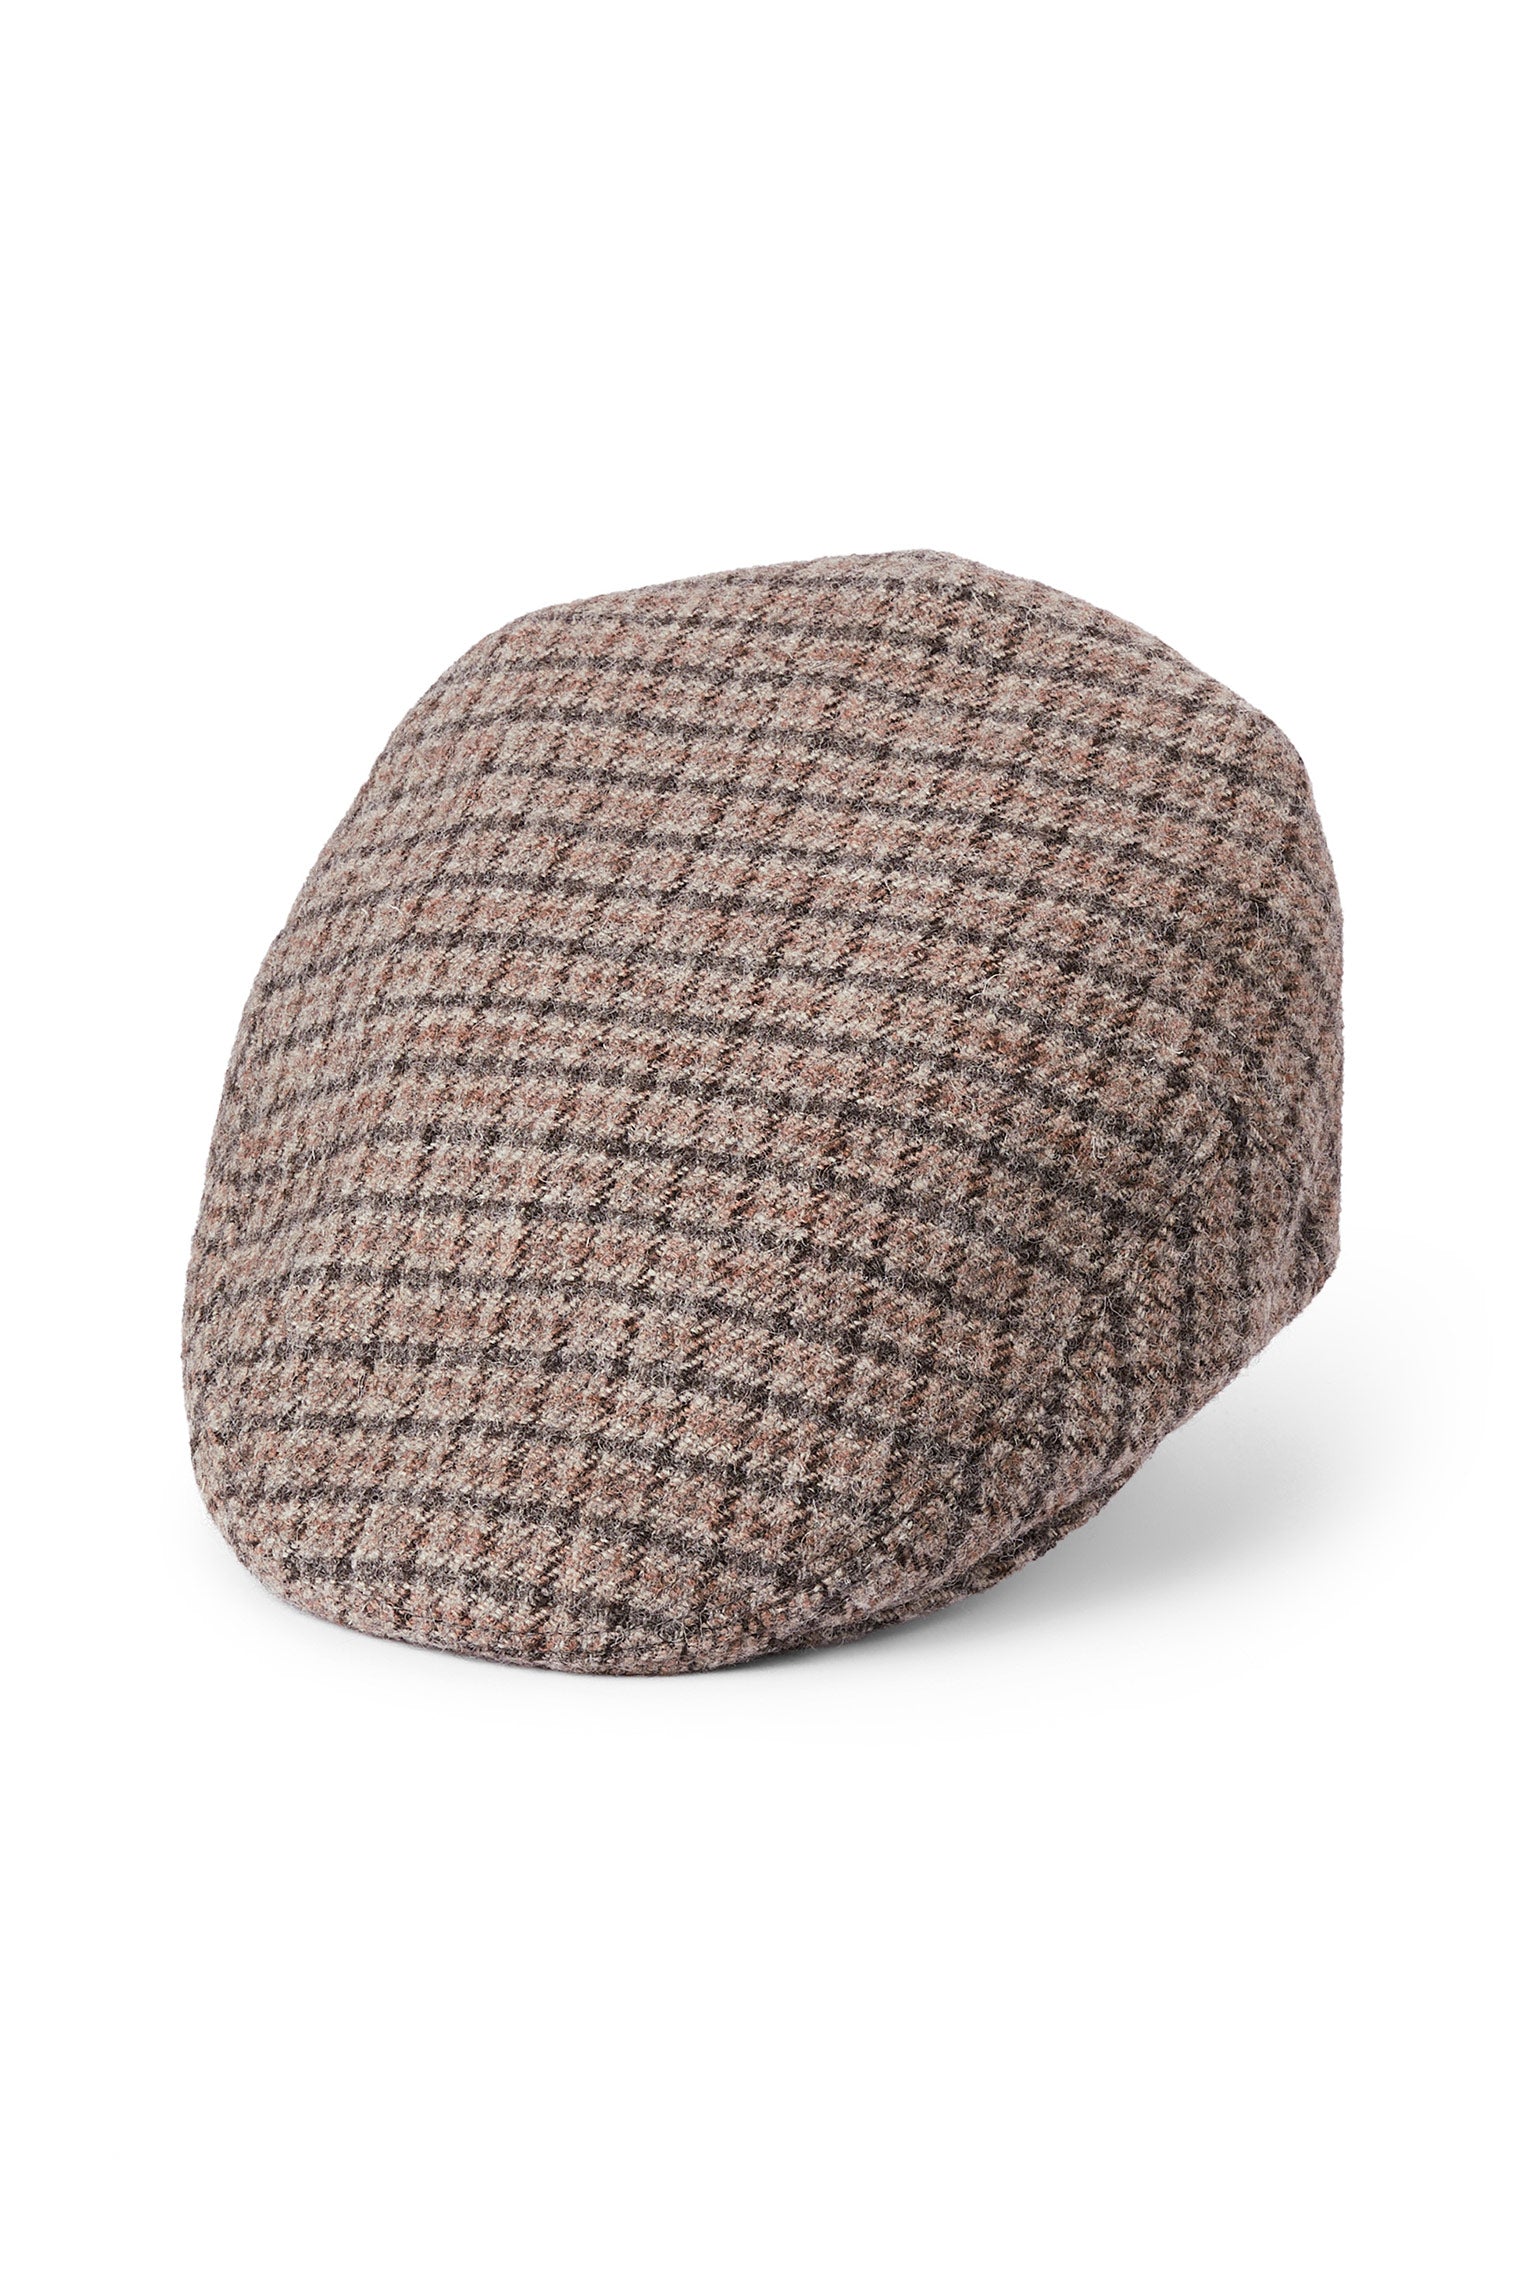 Gill Check Flat Cap - Products - Lock & Co. Hatters London UK